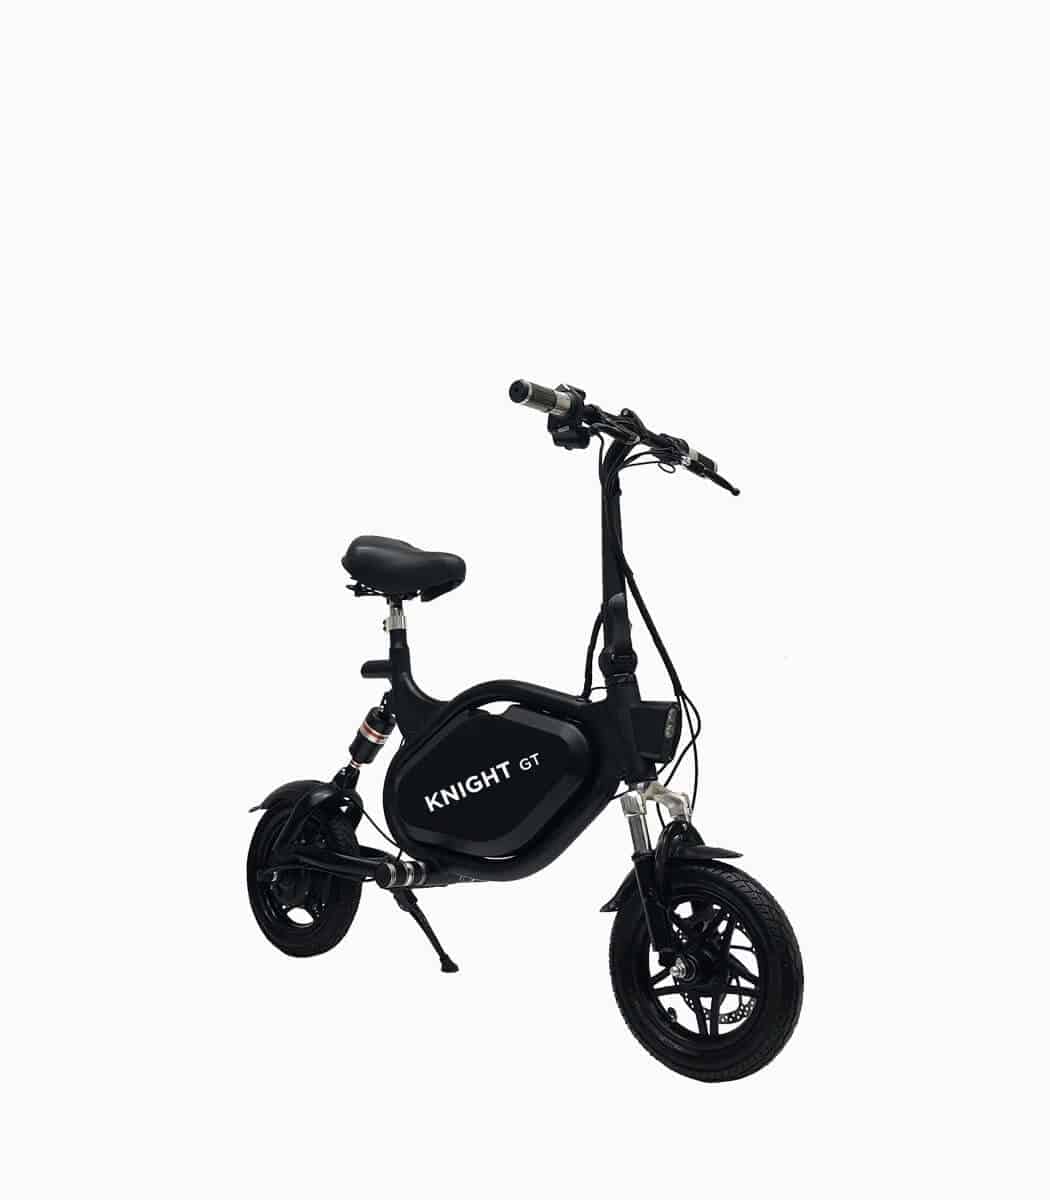 MOBOT KNIGHT GT (BLACK10AH) UL2272 certified e-scooter angled right